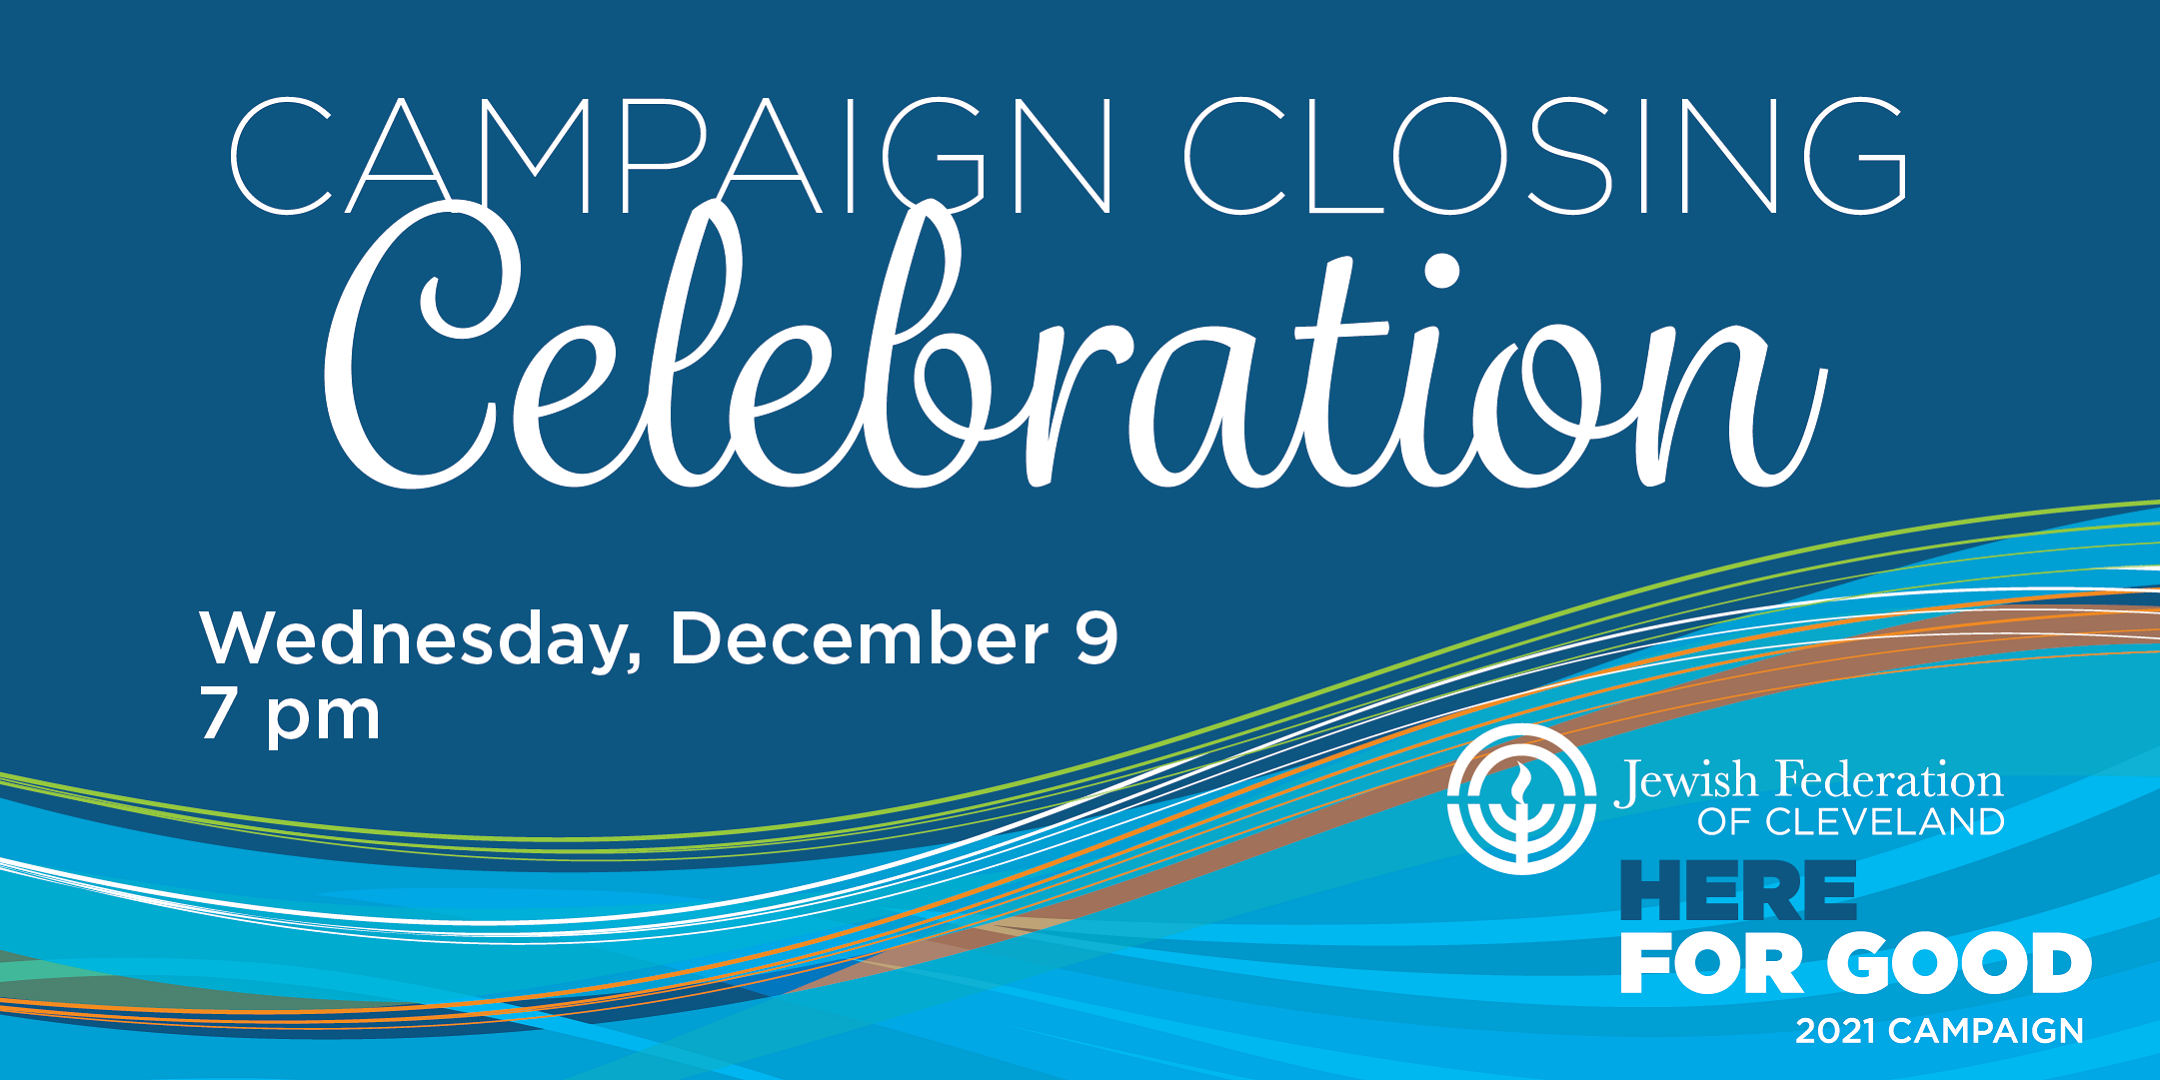 Jewish Federation To Celebrate 2021 Campaign for Jewish Needs at Special Virtual Campaign Closing Event